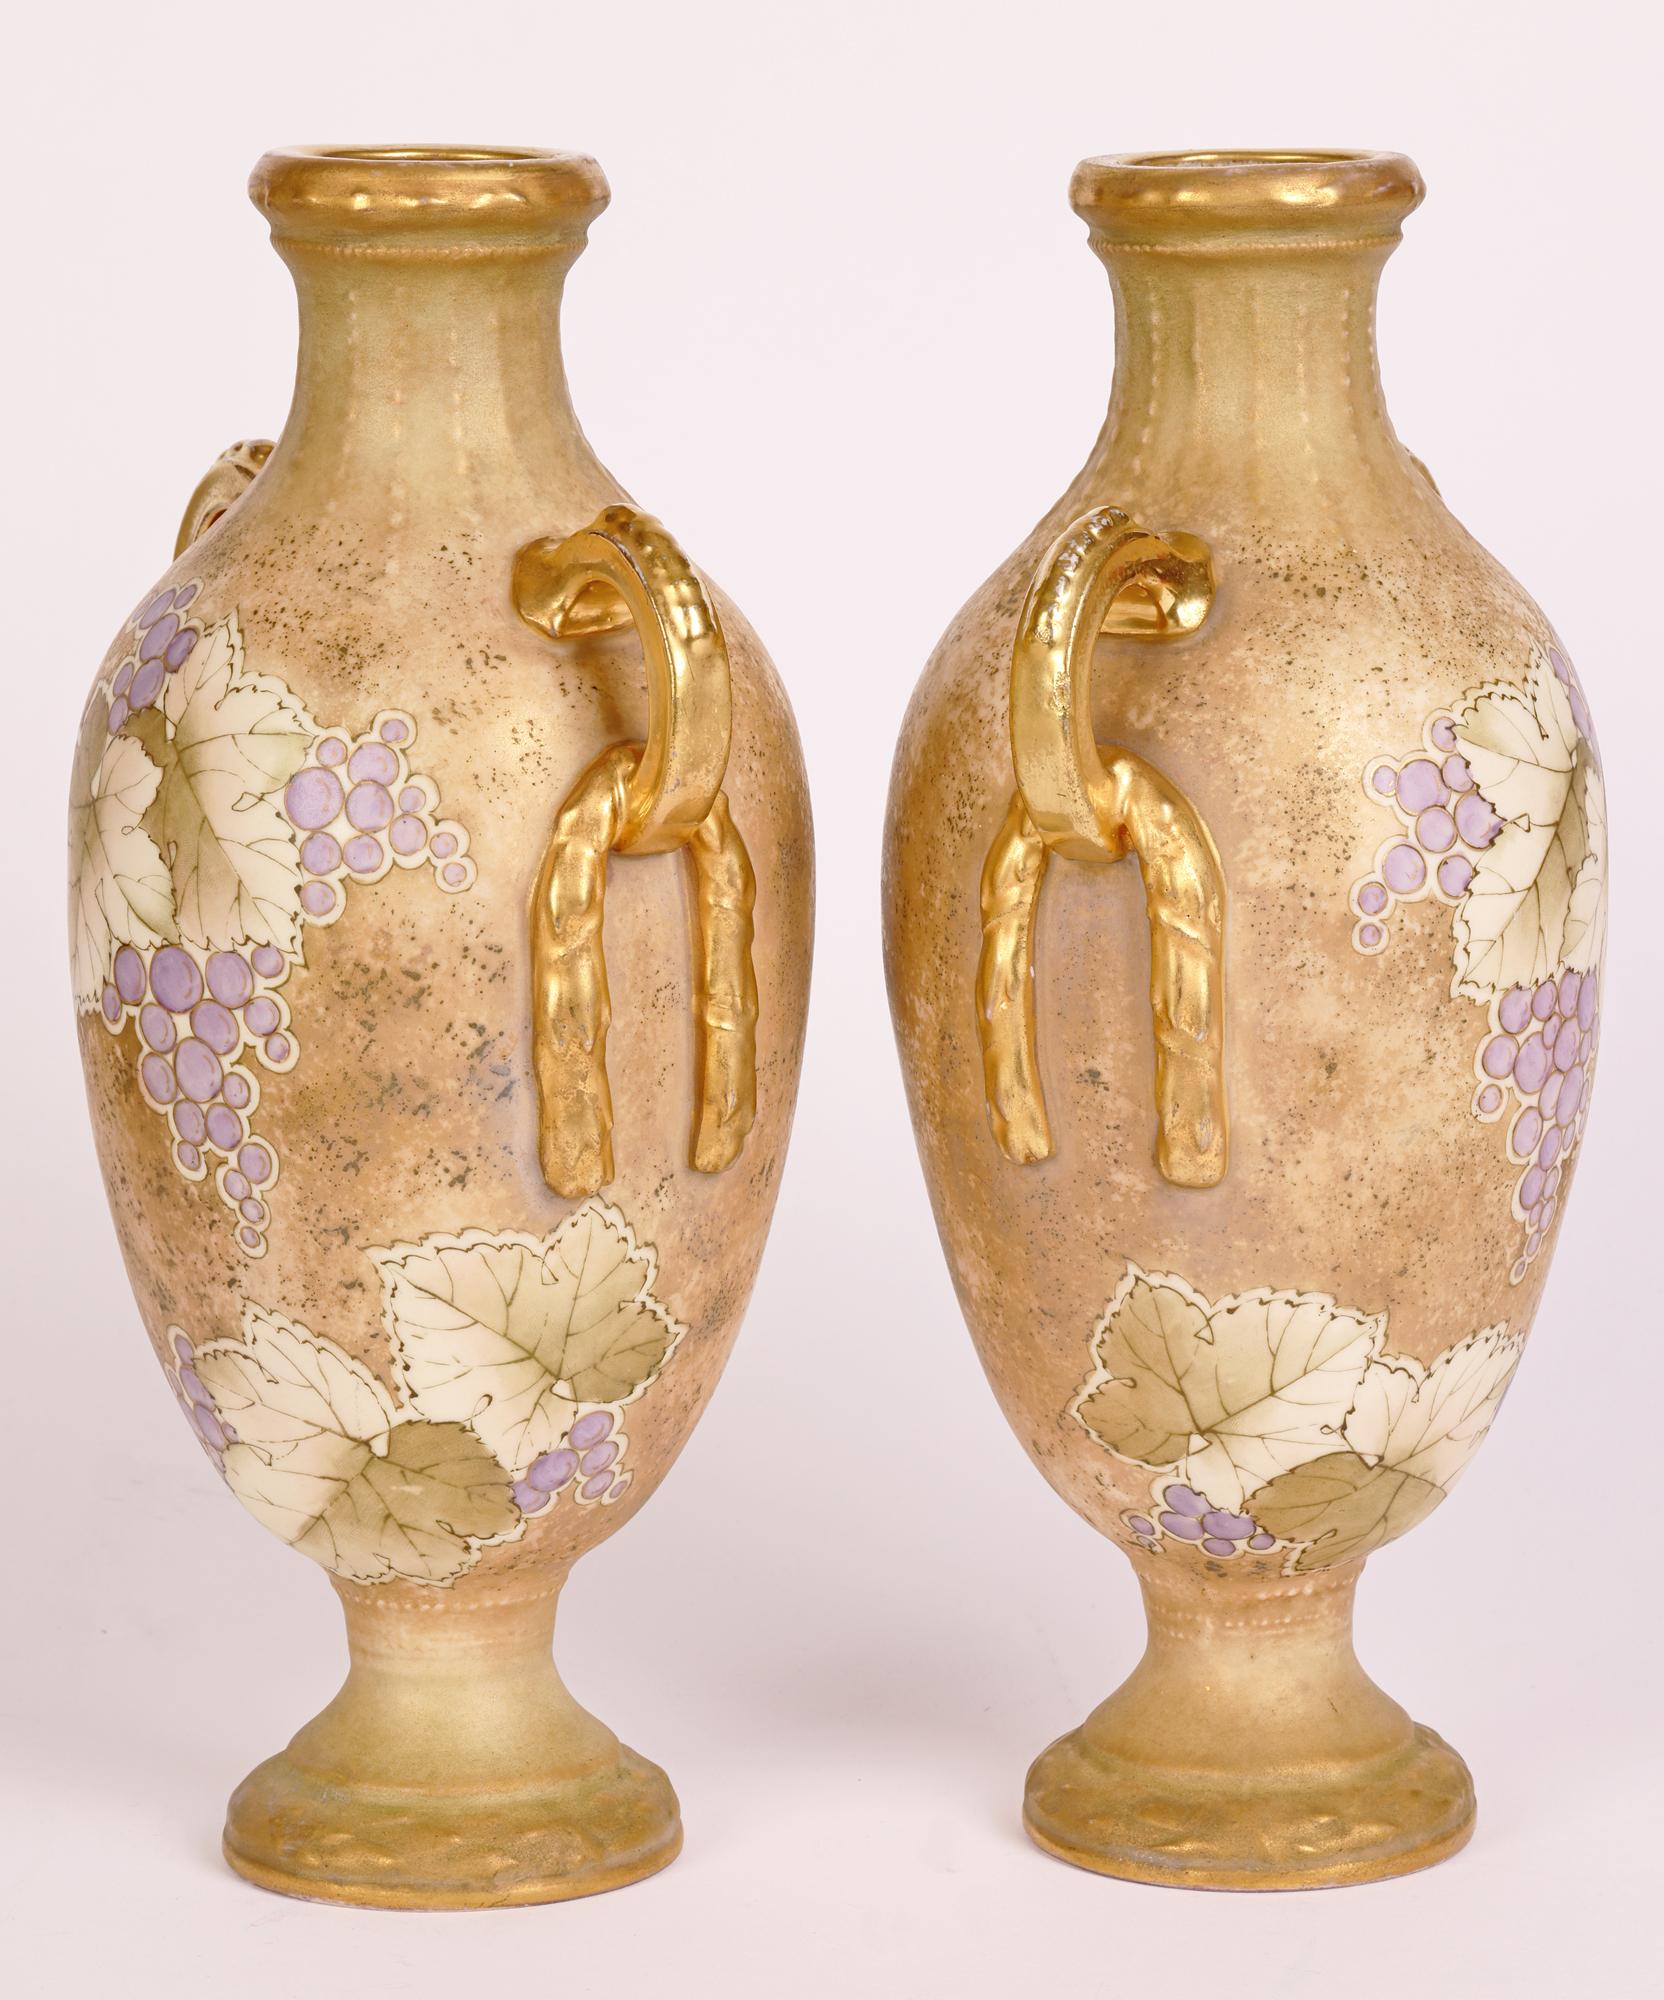 Turn Teplitz RSK Amphora Pair Art Nouveau Hand-Painted Twin Handled Vases For Sale 10